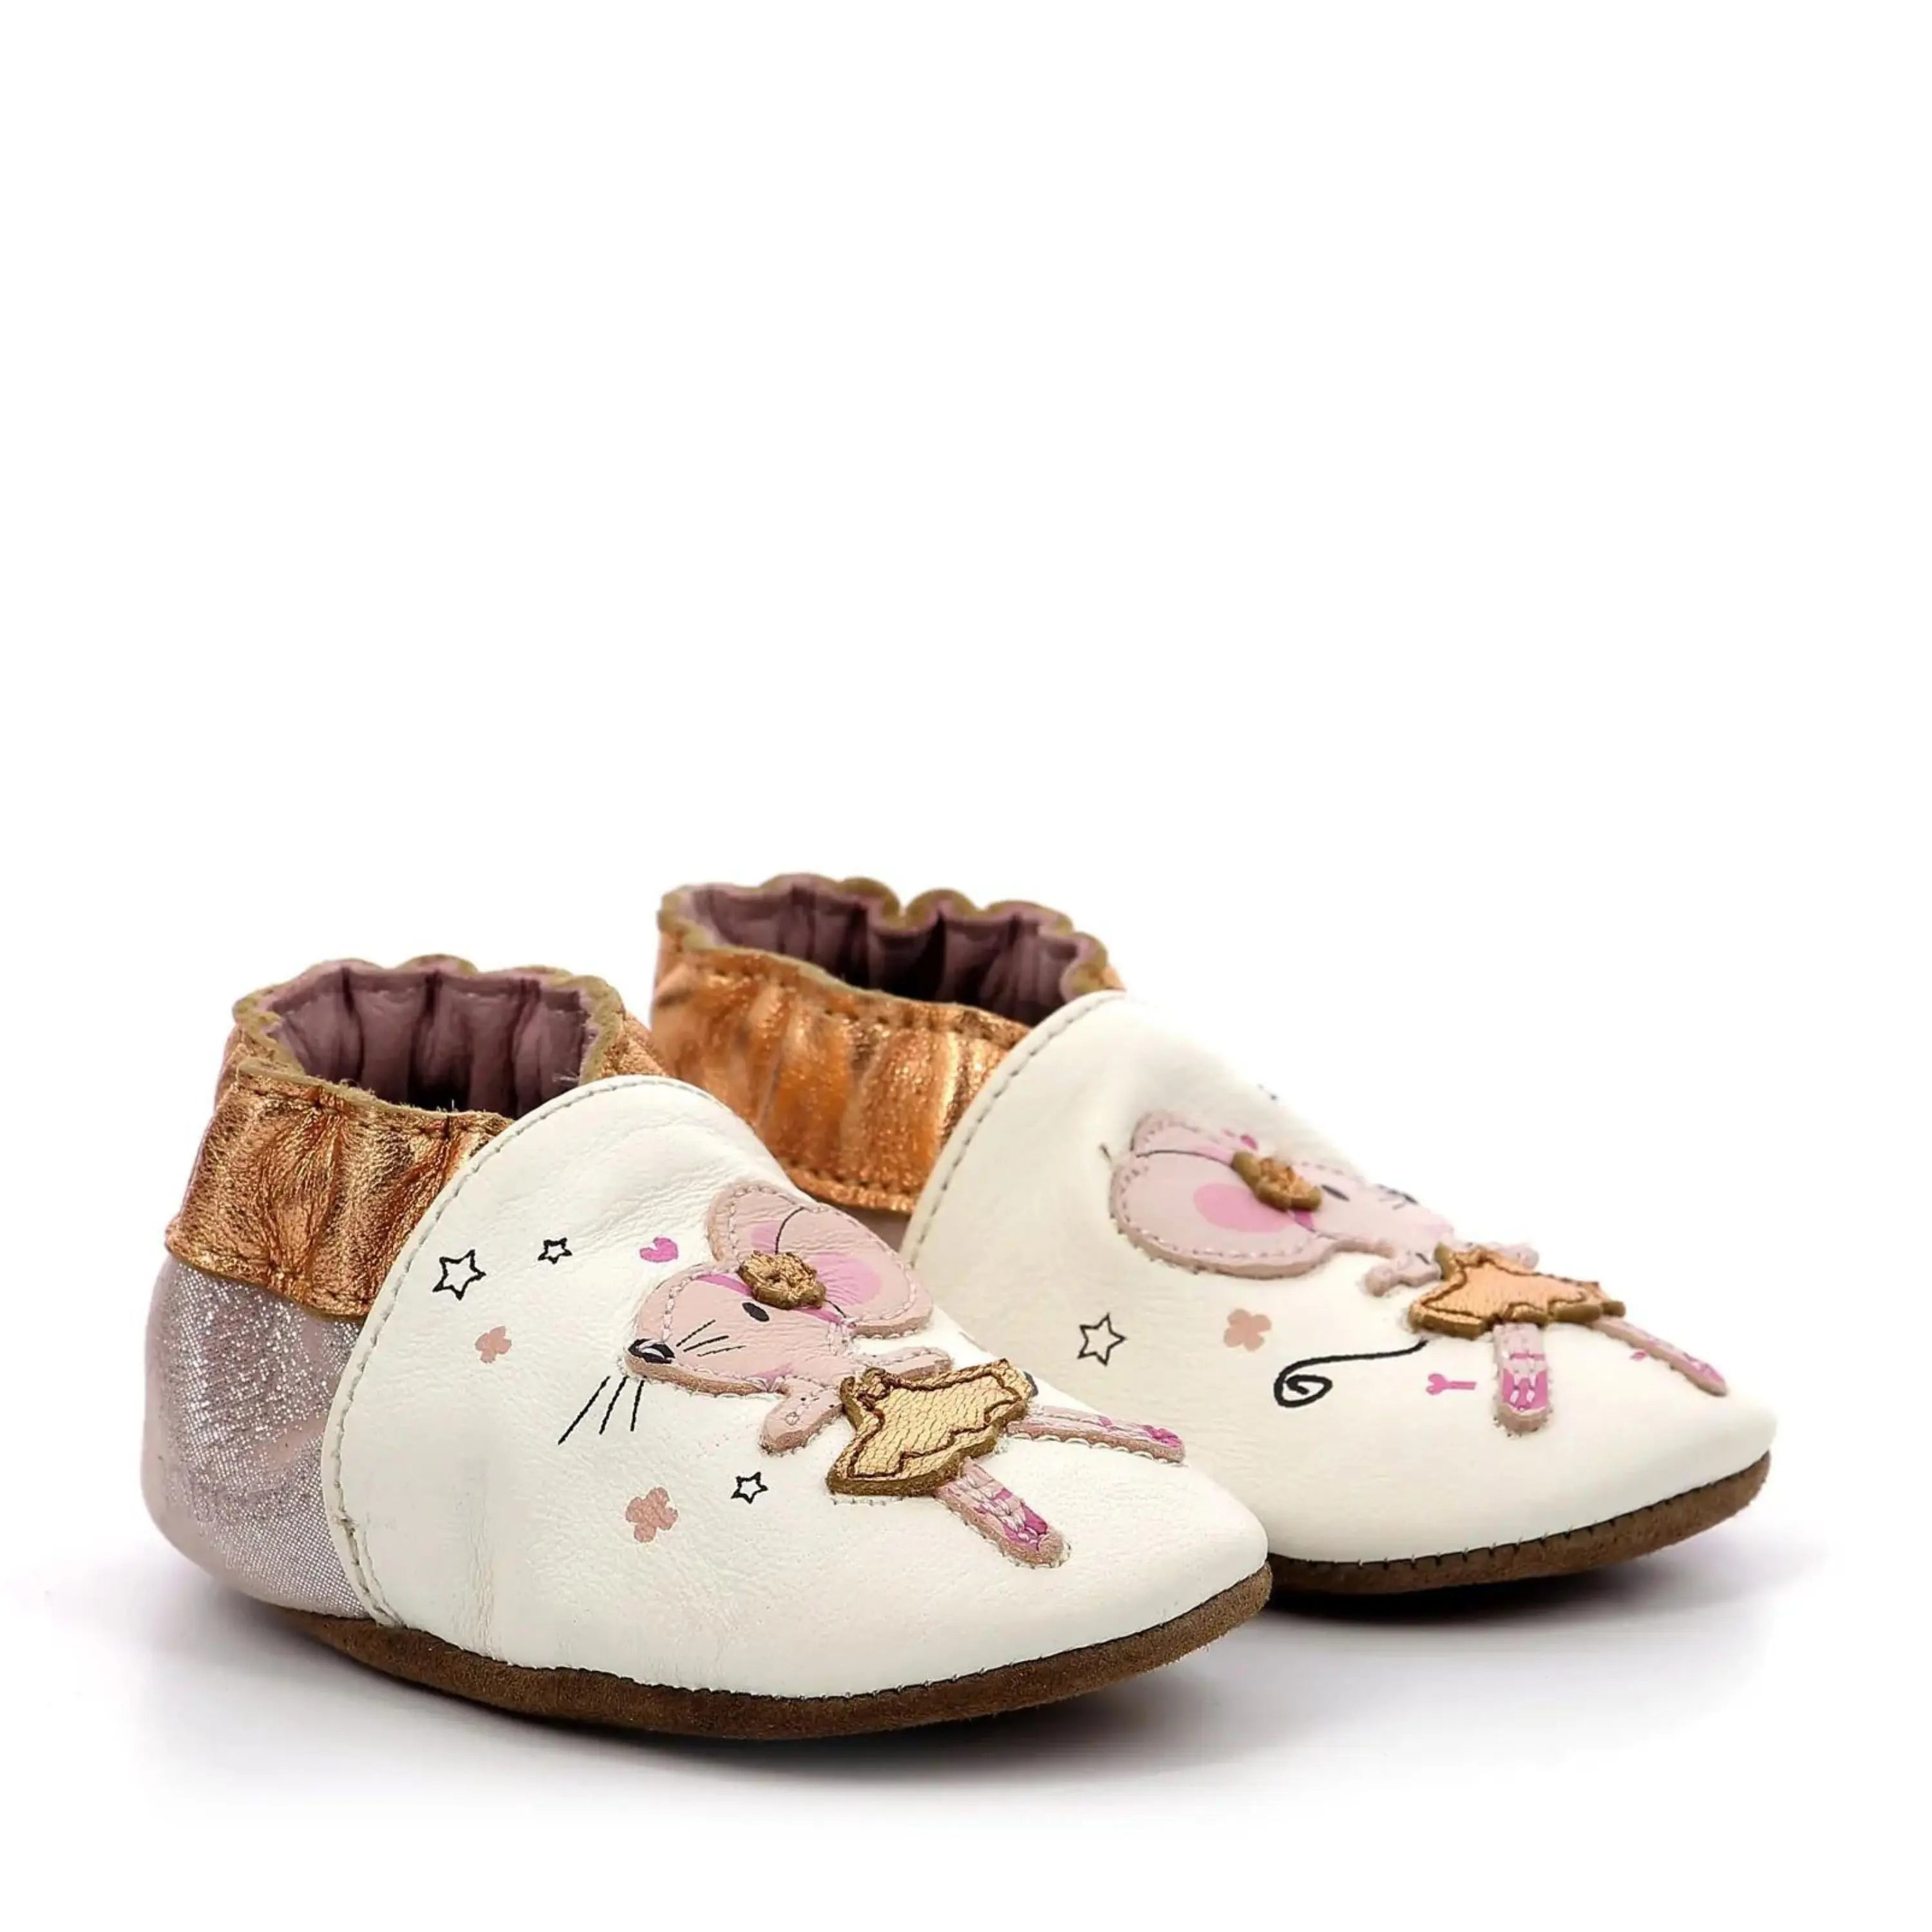 ROBEEZ Chaussons Dancing Mouse Blanc Rose Glitter ma petite pointure